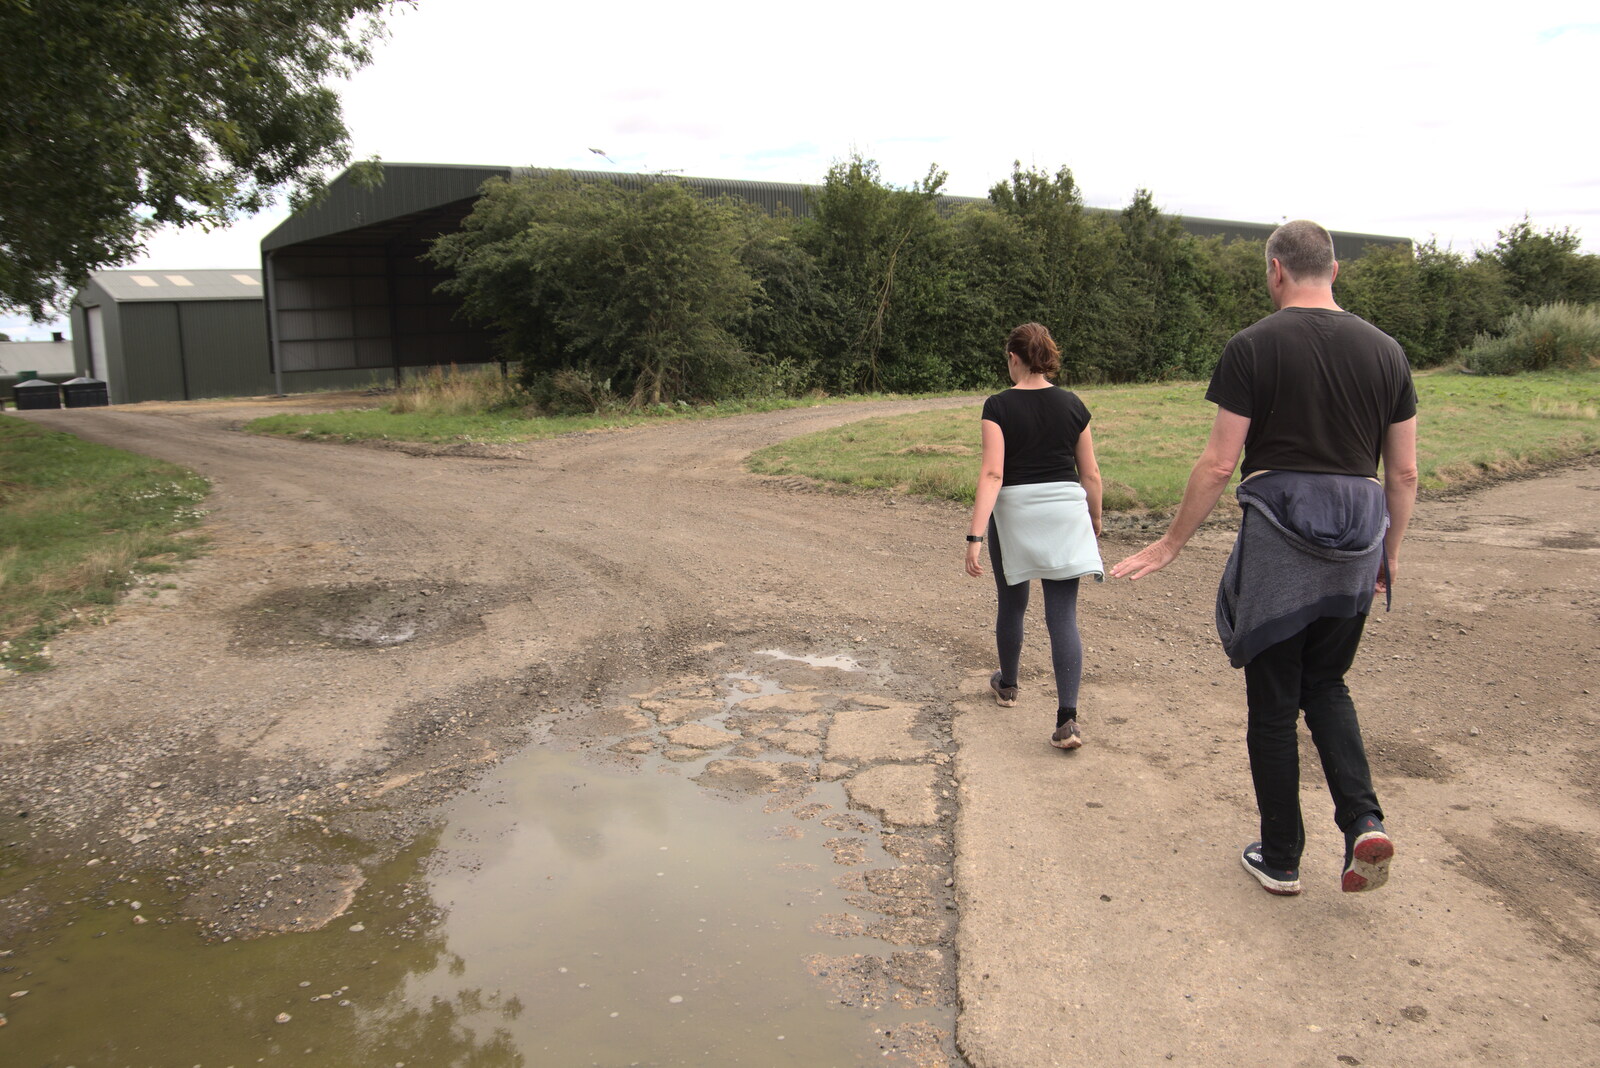 Near the straw barns from Meg-fest, and Sean Visits, Bressingham and Brome, Suffolk - 1st August 2021